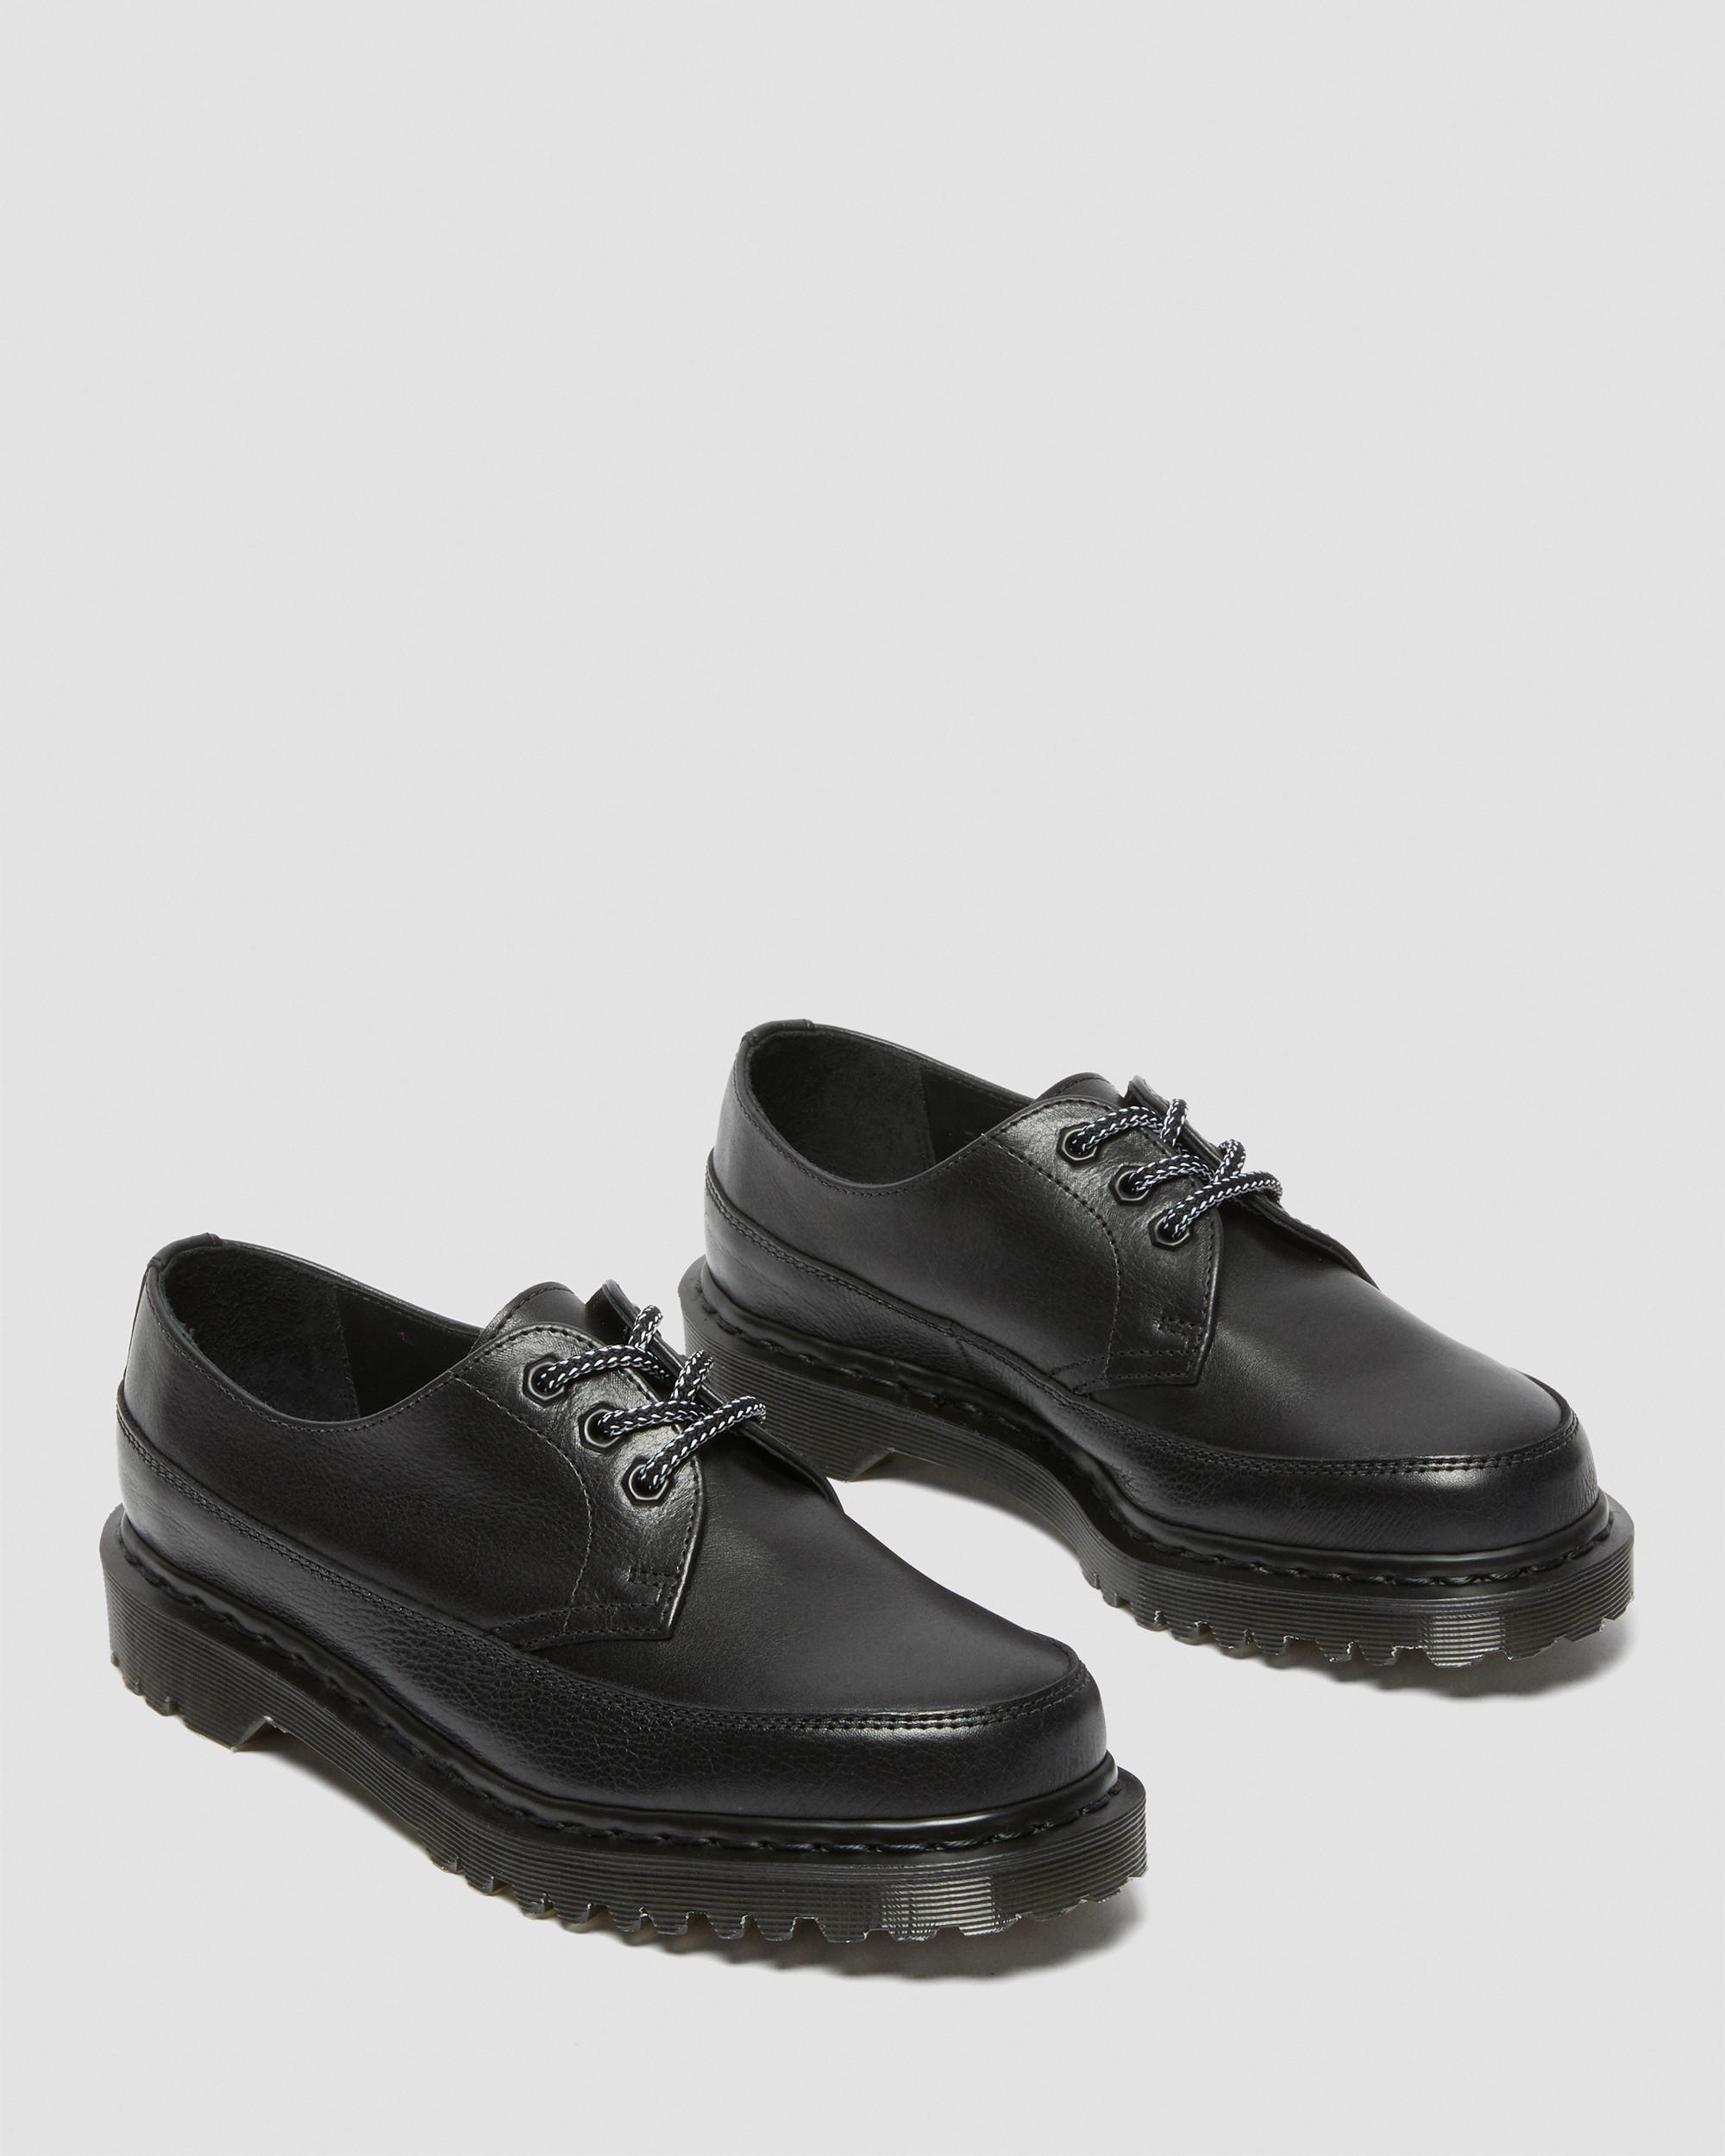 DR MARTENS 1461 Haven Made in England Leather Shoes